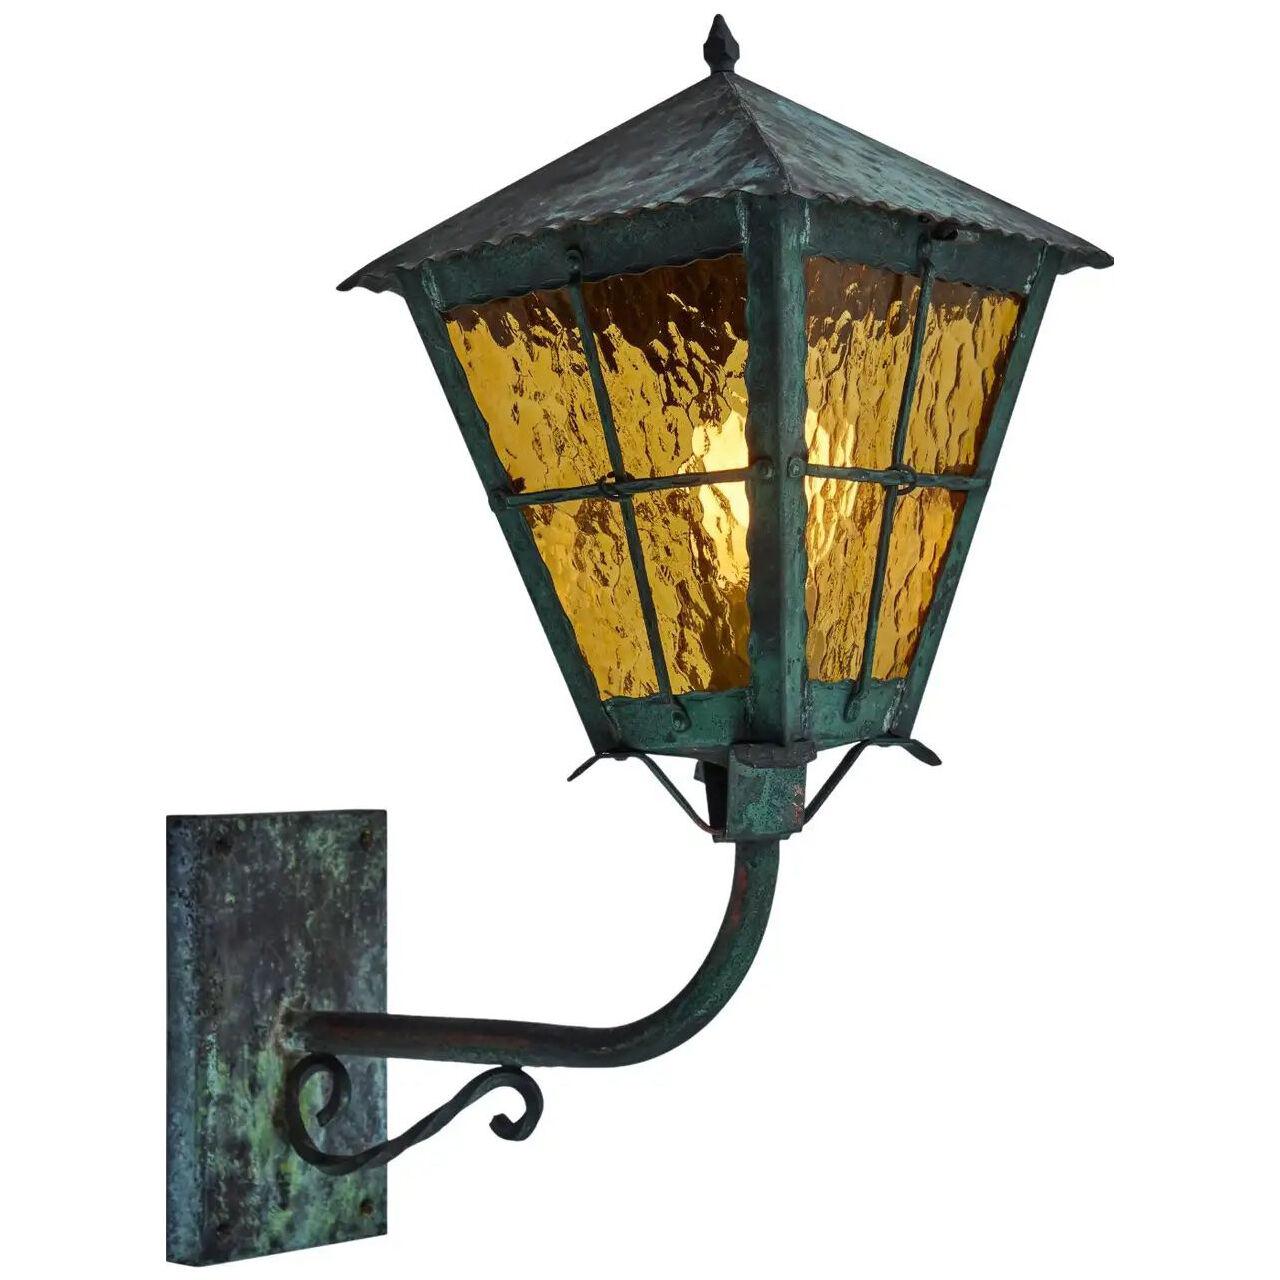 1950s Large Scandinavian Outdoor Wall Light in Patinated Copper and Amber Glass